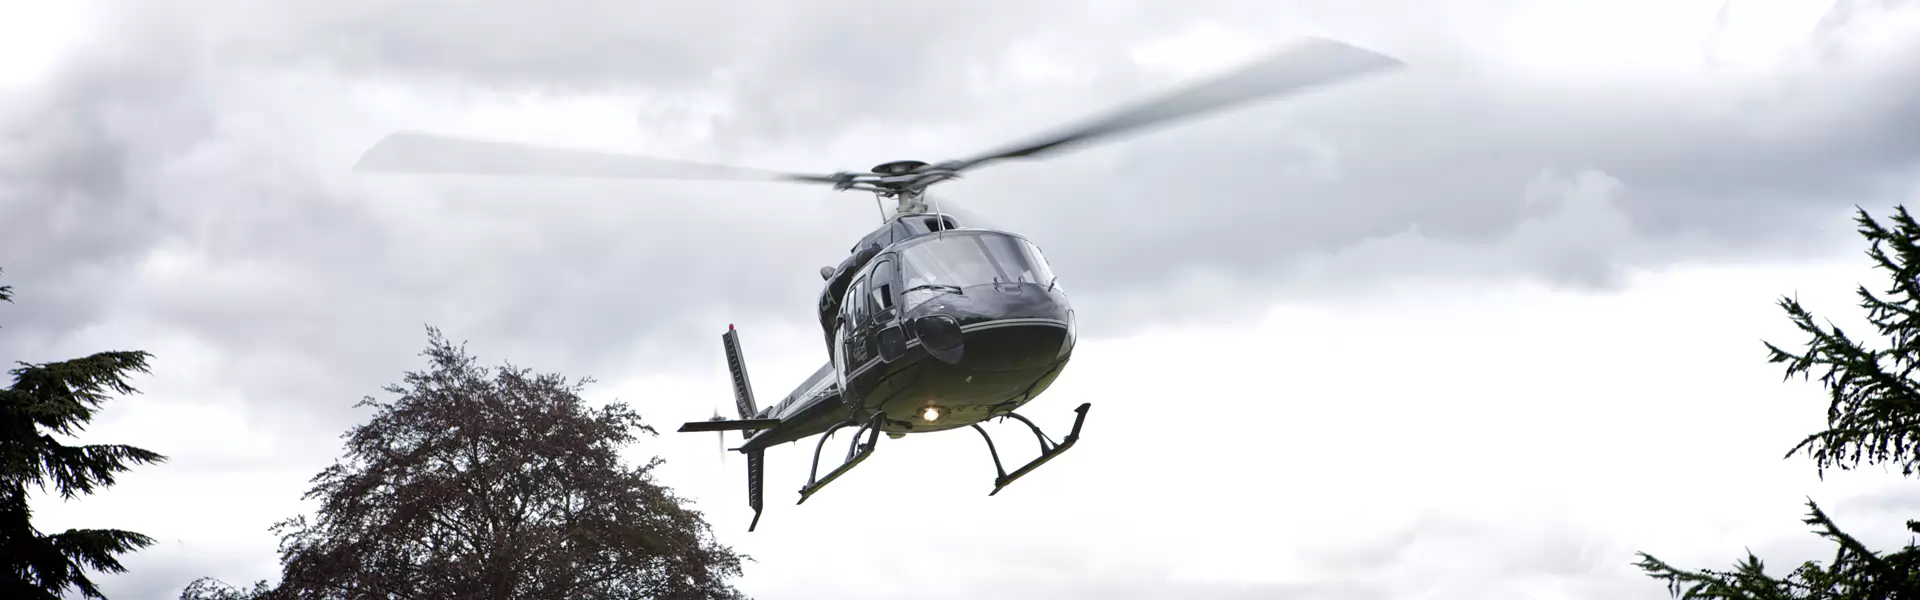 Arriving by Helicopter - Wedding Planner Services